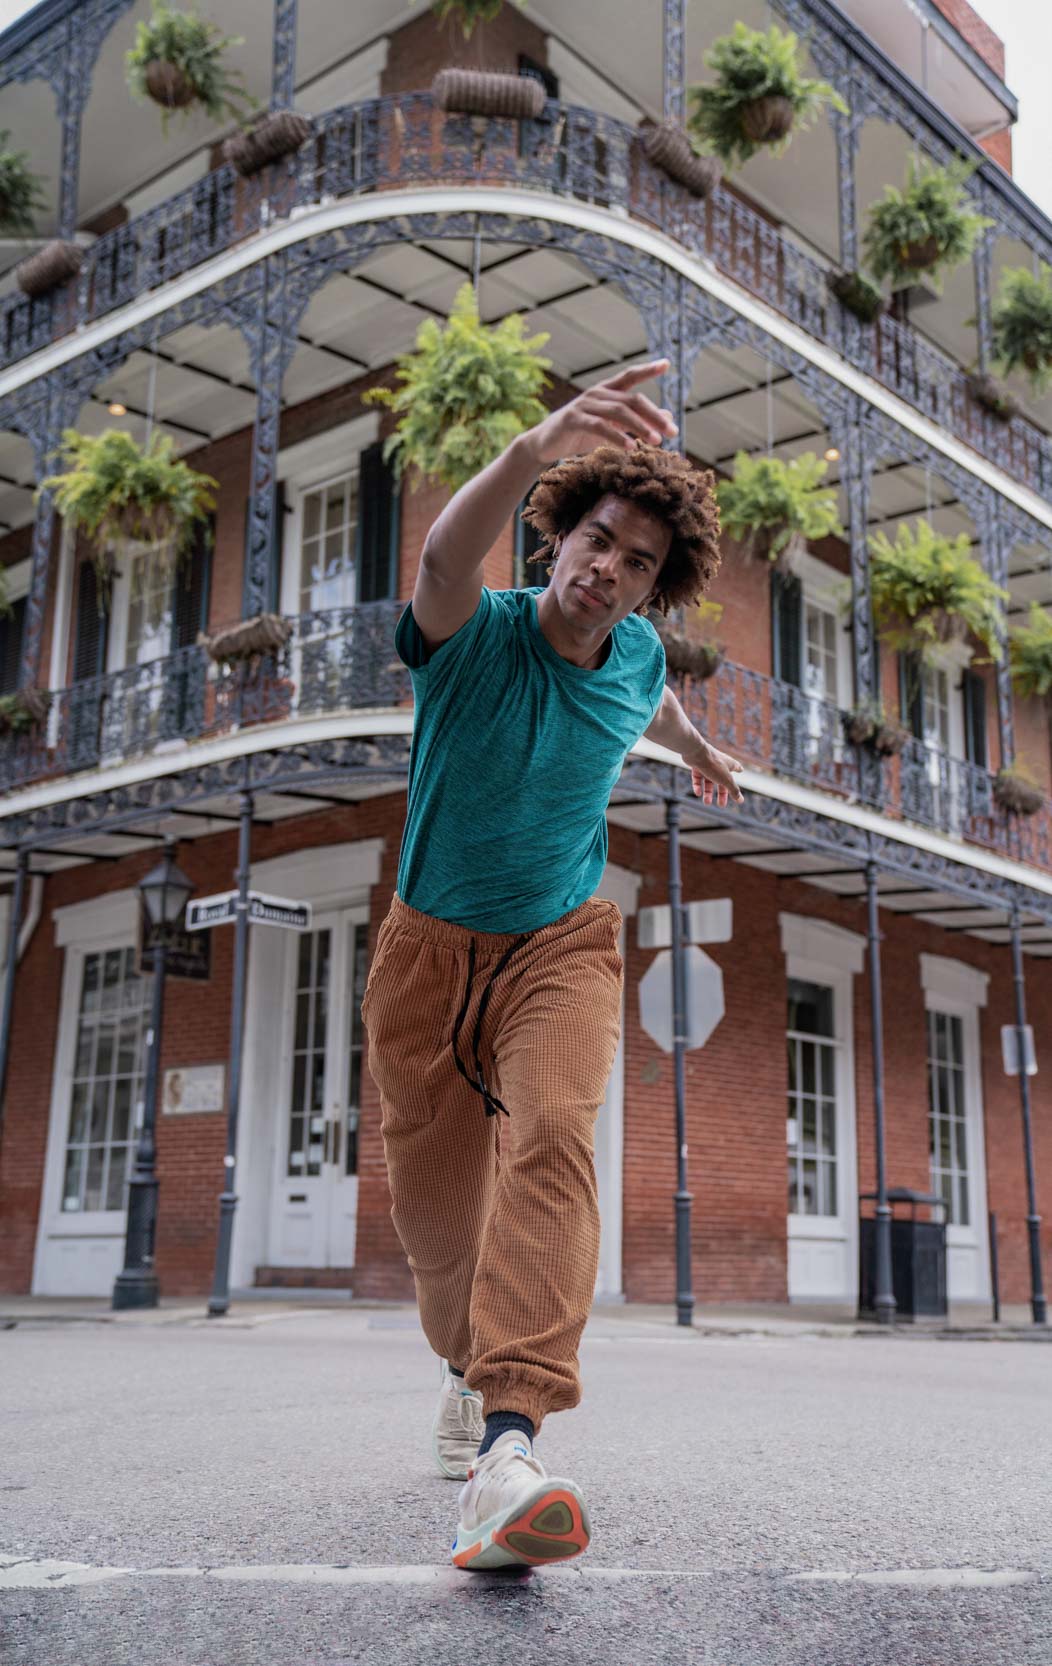 A man walking and modeling for a dance shoot in the the New Orleans French Quarter